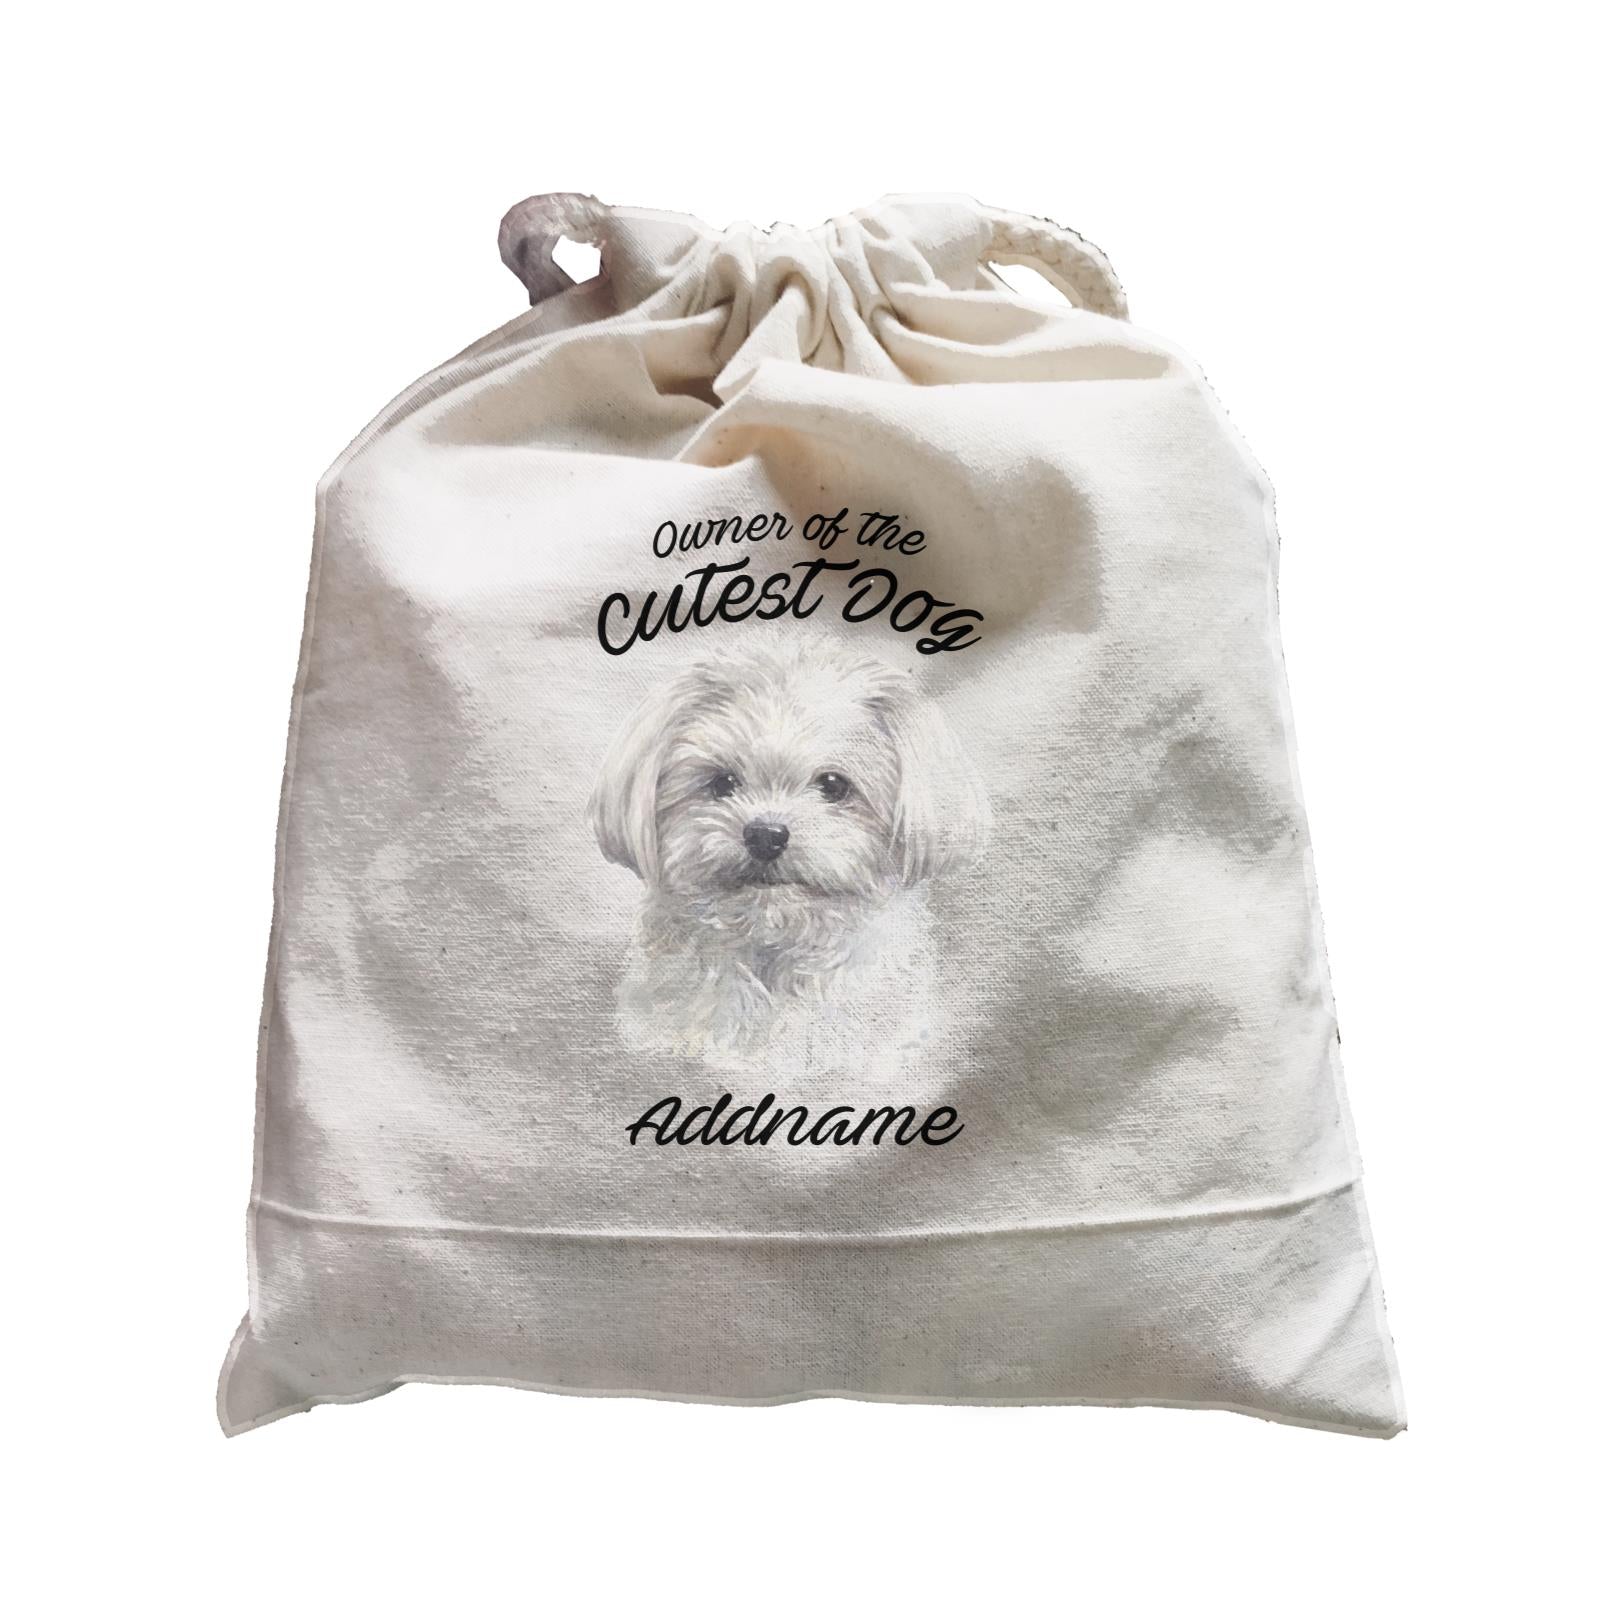 Watercolor Dog Owner Of The Cutest Dog Maltese White Addname Satchel